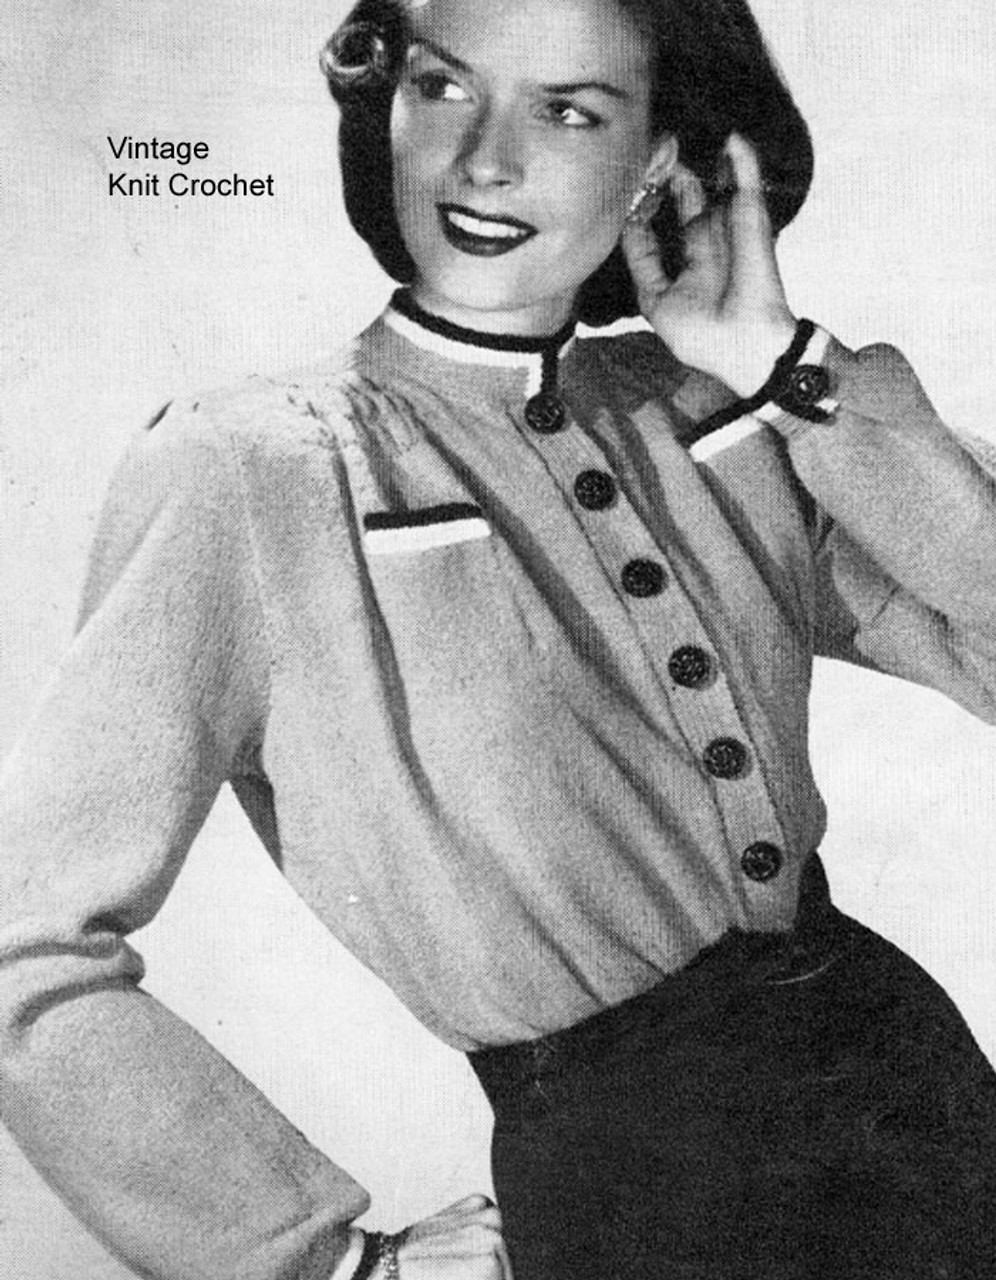 Long Sleeve knitted blouse pattern, vintage 1940's